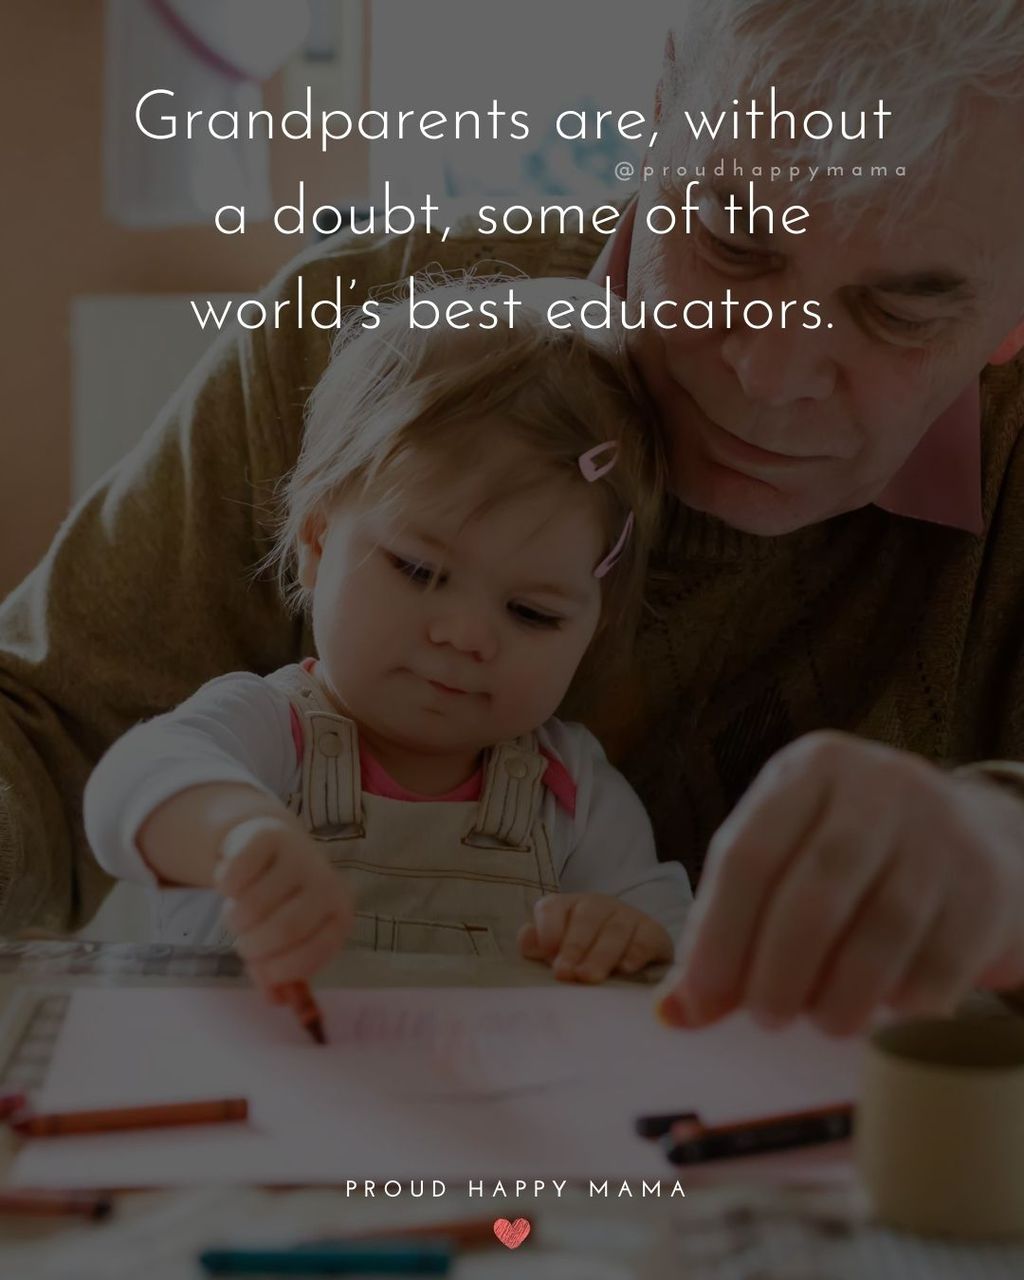 Grandfather Quotes | Grandparents are, without a doubt, some of the world’s best educators.